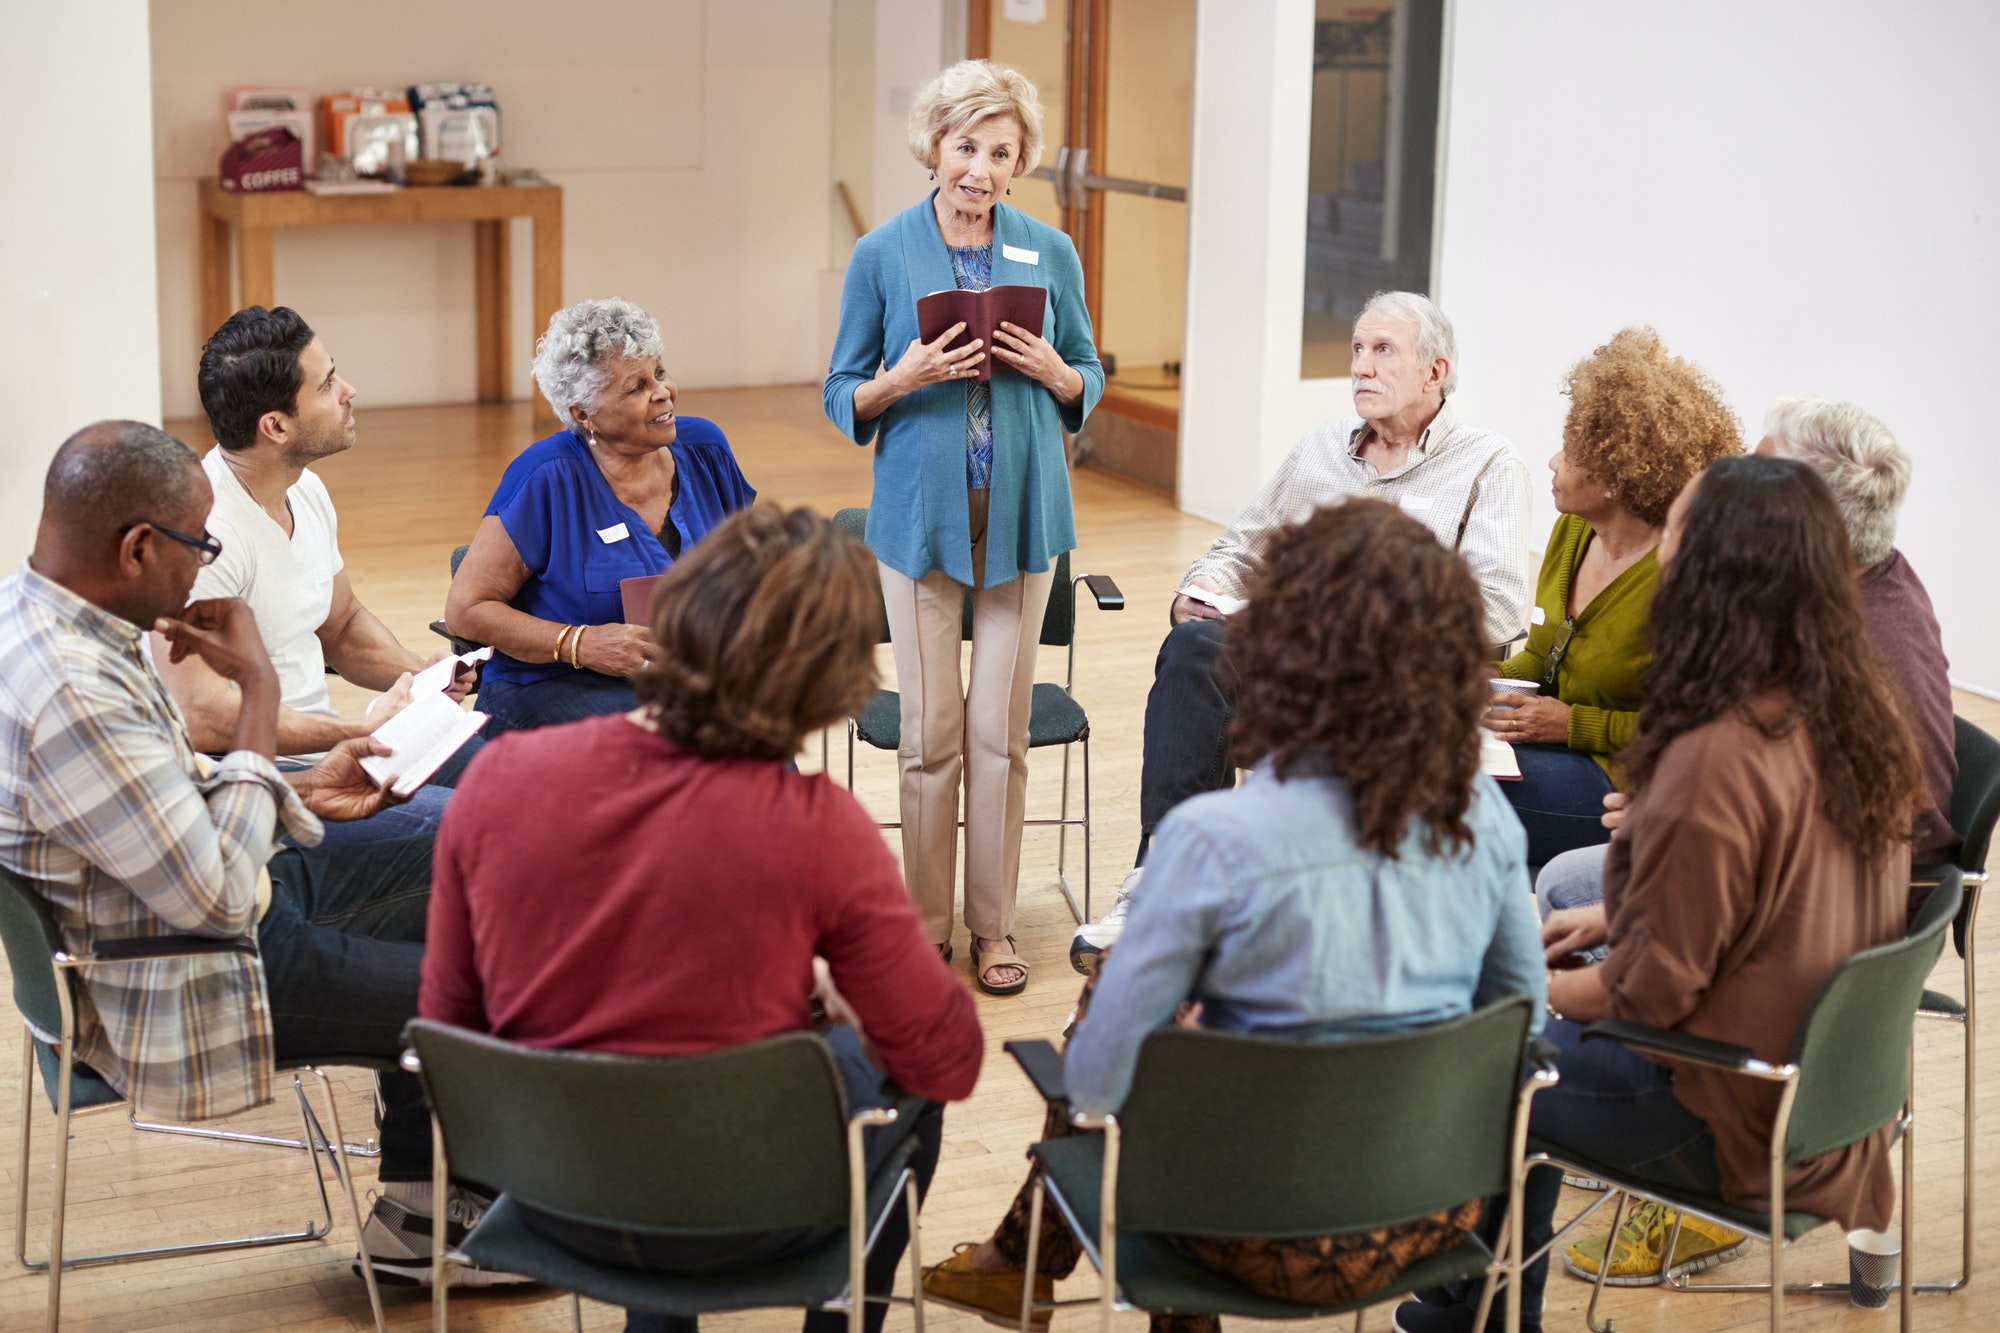 People Attending Bible Study Or Book Group Meeting In Community Center